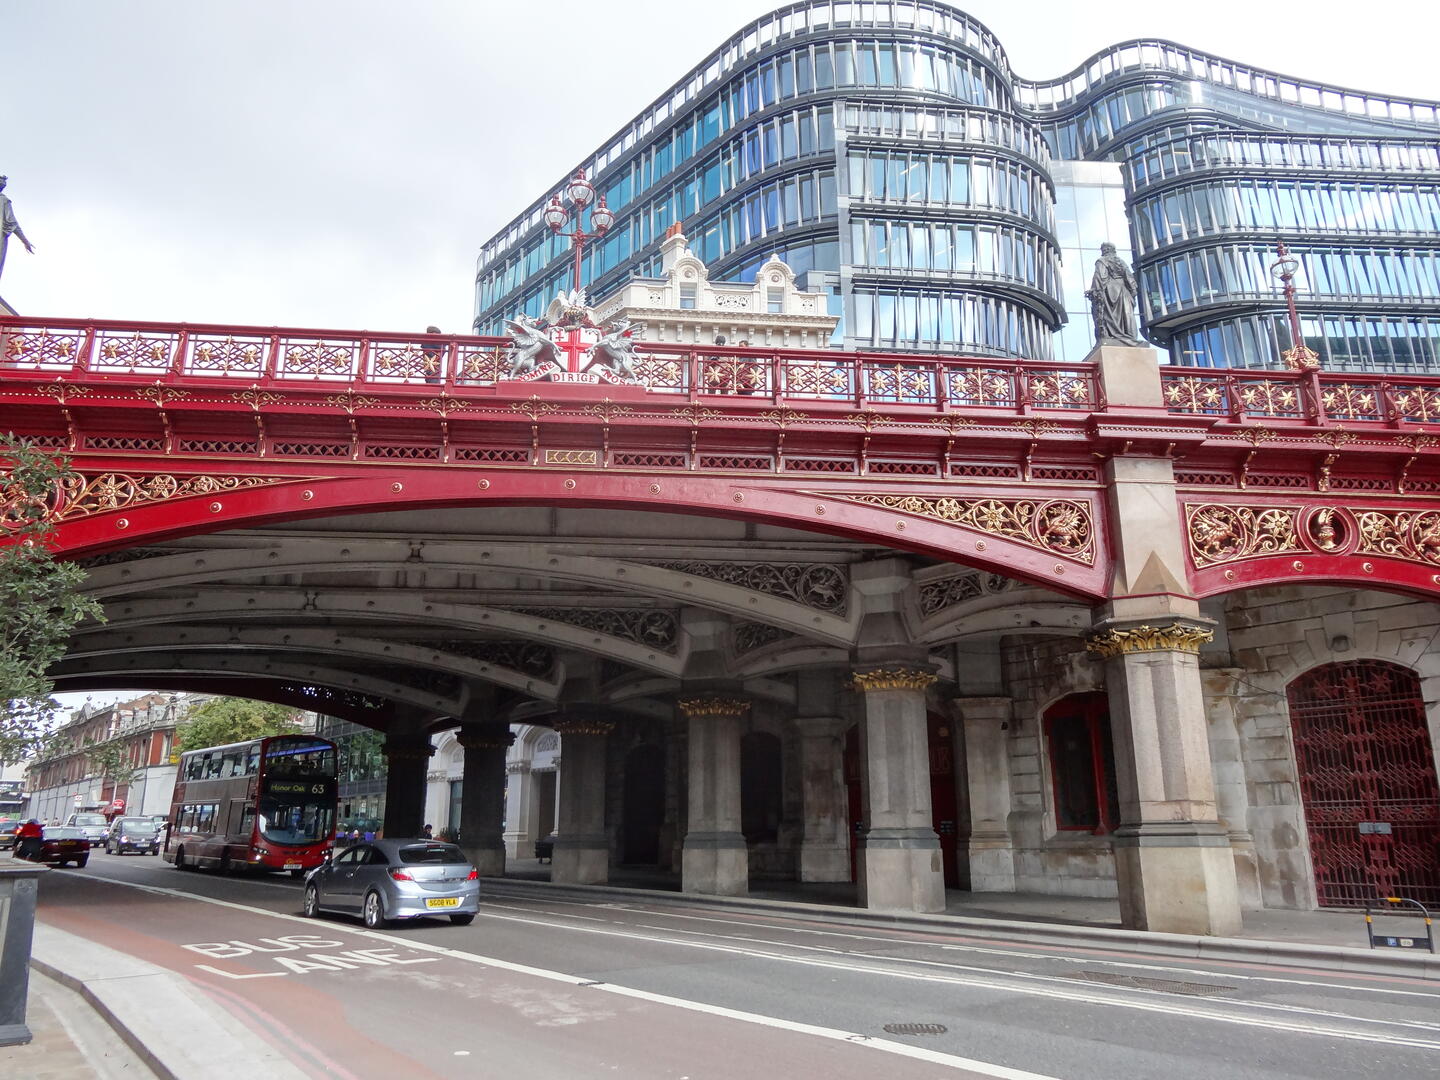 Student Accommodation in Holborn - the Holborn Viaduct